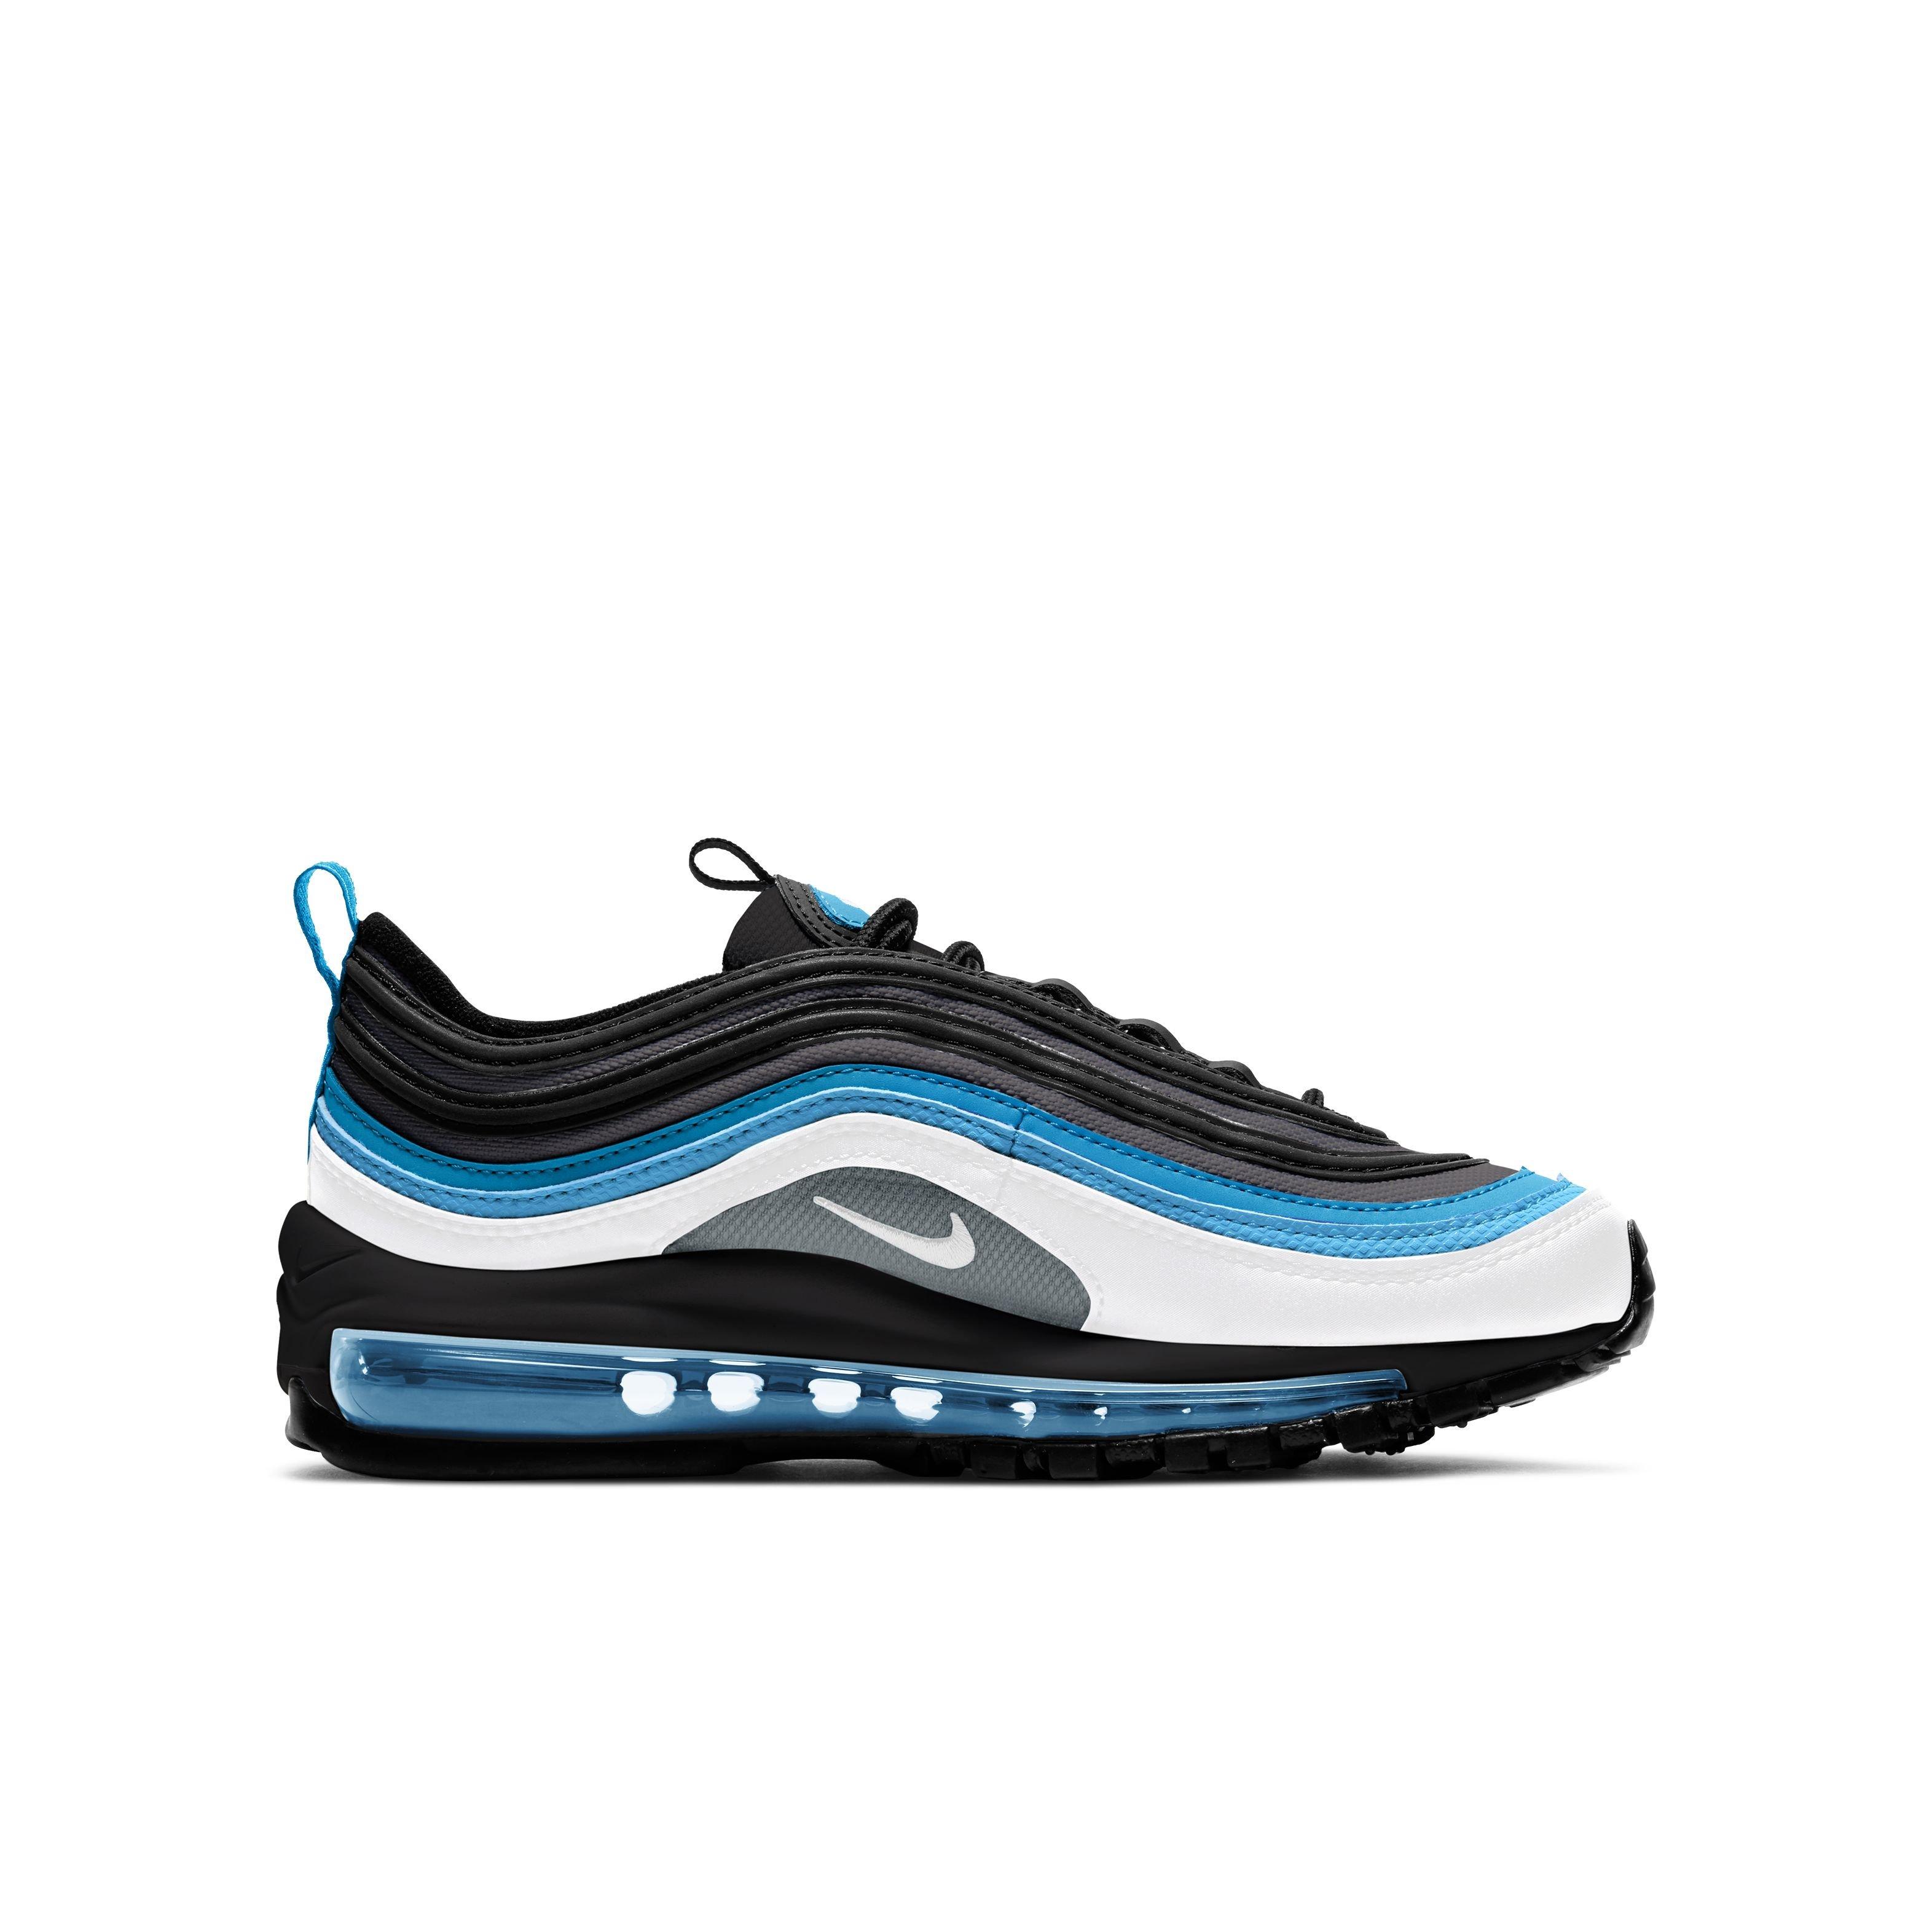 purple white and turquoise air max 97